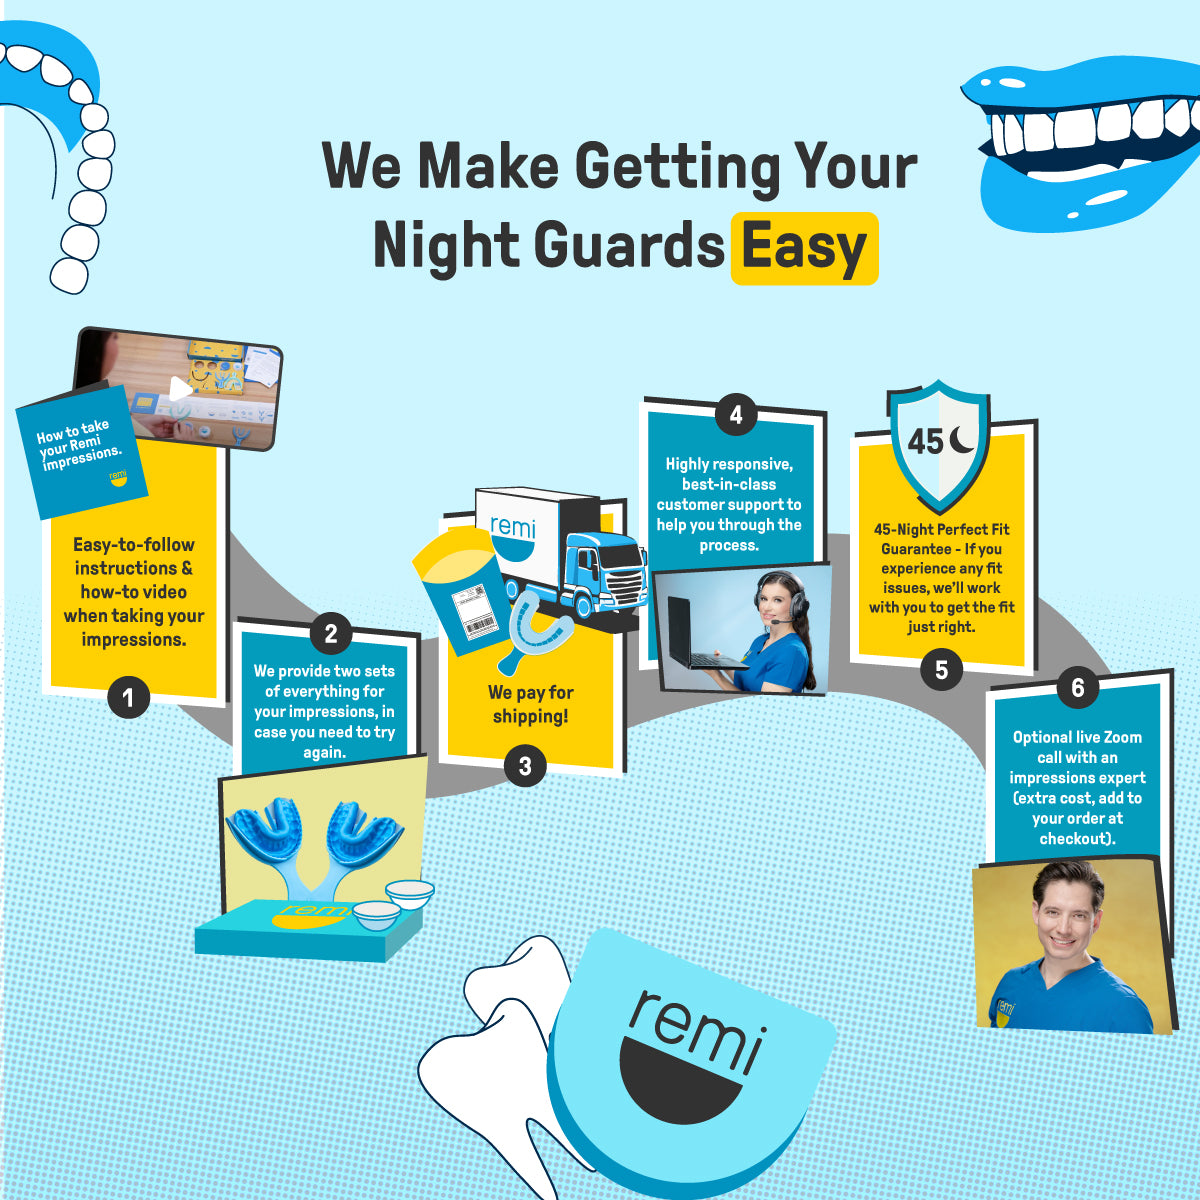 An infographic explaining the process of obtaining dental-grade quality night guards from the company &quot;remi,&quot; highlighting a five-step approach that includes making impressions, shipping, and receiving the finished Custom Night Guards.